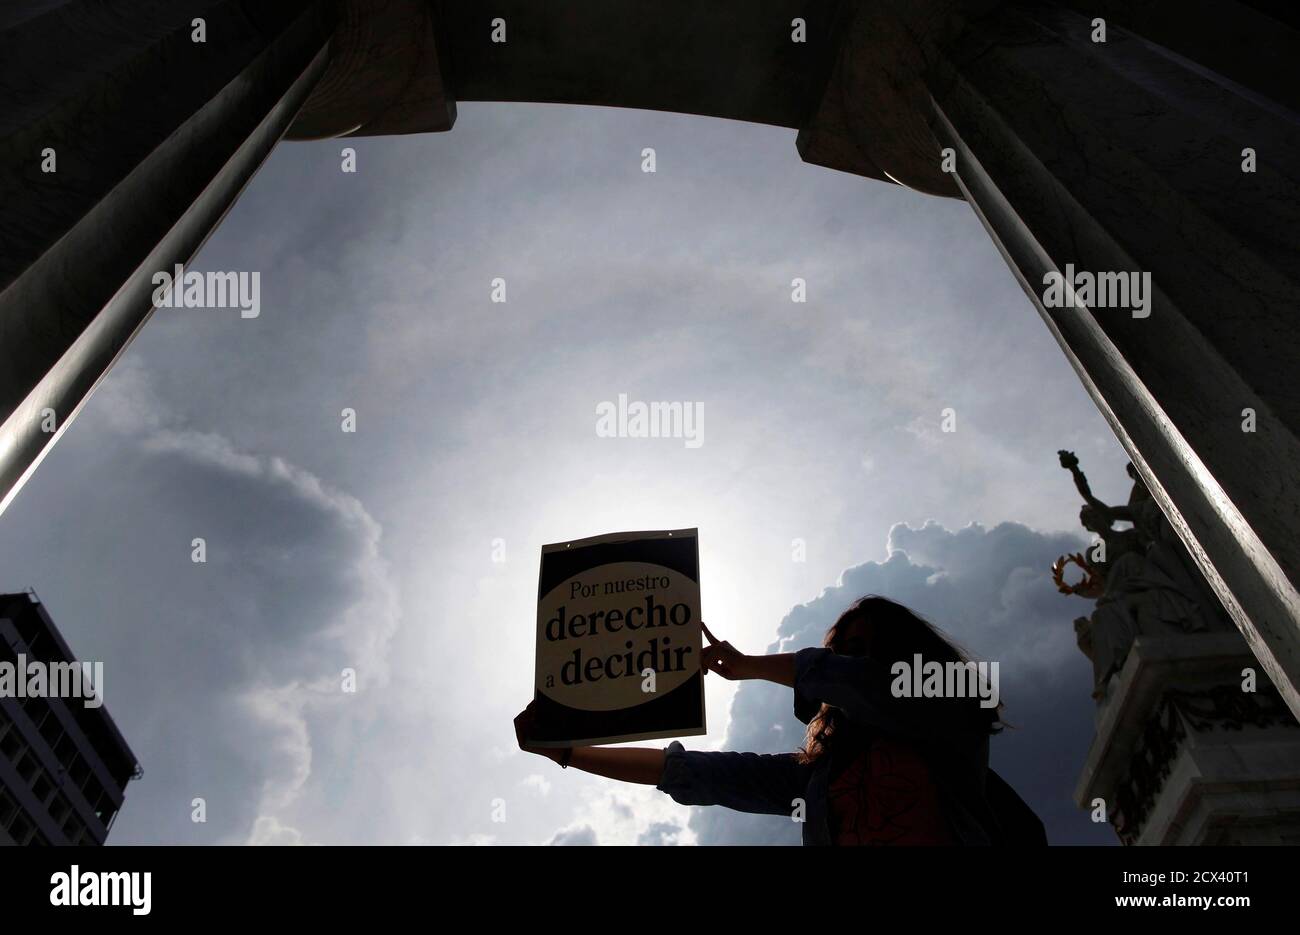 An activist holds up a poster that reads,'For our right to decide', during a demonstration in support of an 11-year-old Chilean girl, whose 32-year-old stepfather has been accused of raping her, in Mexico City July 25, 2013. The pregnancy of 'Belen', as she is known, has sparked an outcry in the Andean country, where abortion is banned under all circumstances. Abortion in Chile used to be allowed when pregnancies posed health risks, but was fully outlawed by the 1973-1990 Augusto Pinochet dictatorship, according to Human Rights Watch. REUTERS/Edgard Garrido (MEXICO - Tags: SOCIETY CIVIL UNREST Stock Photo